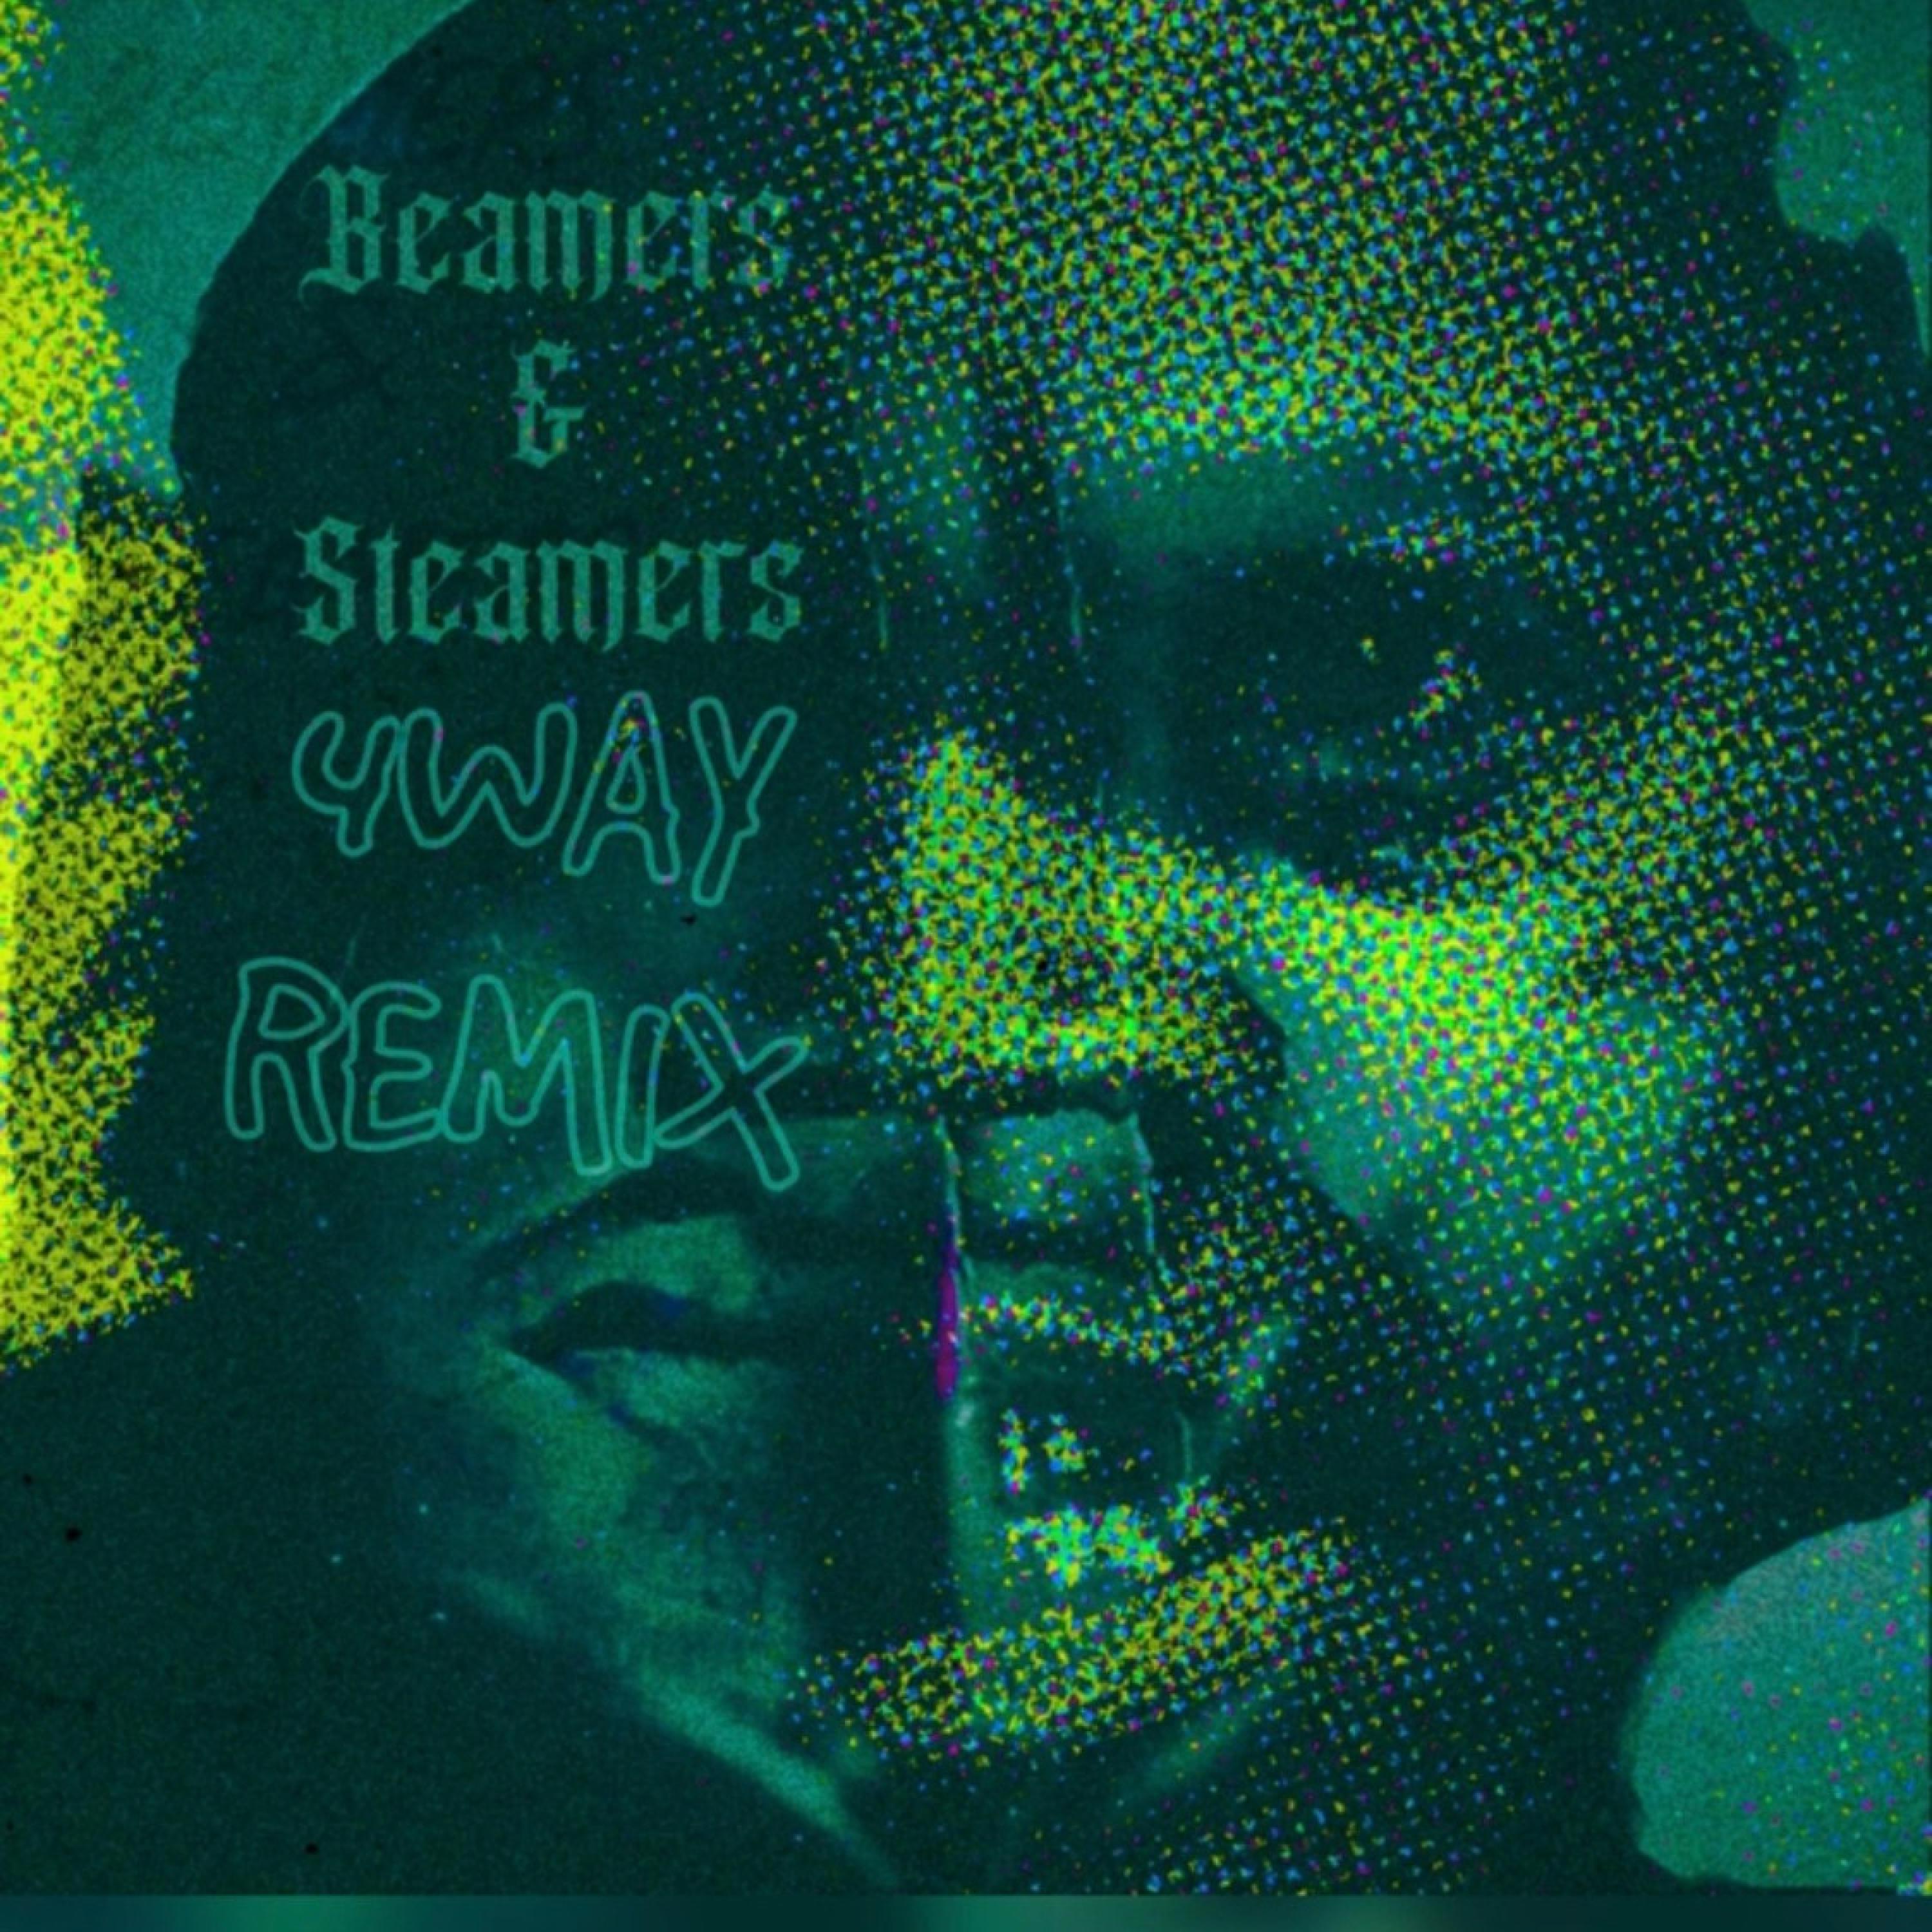 SouthE Steve - Beamers and Steamers (feat. Nina Vikassi & YUNG4WAYG) (Remix)